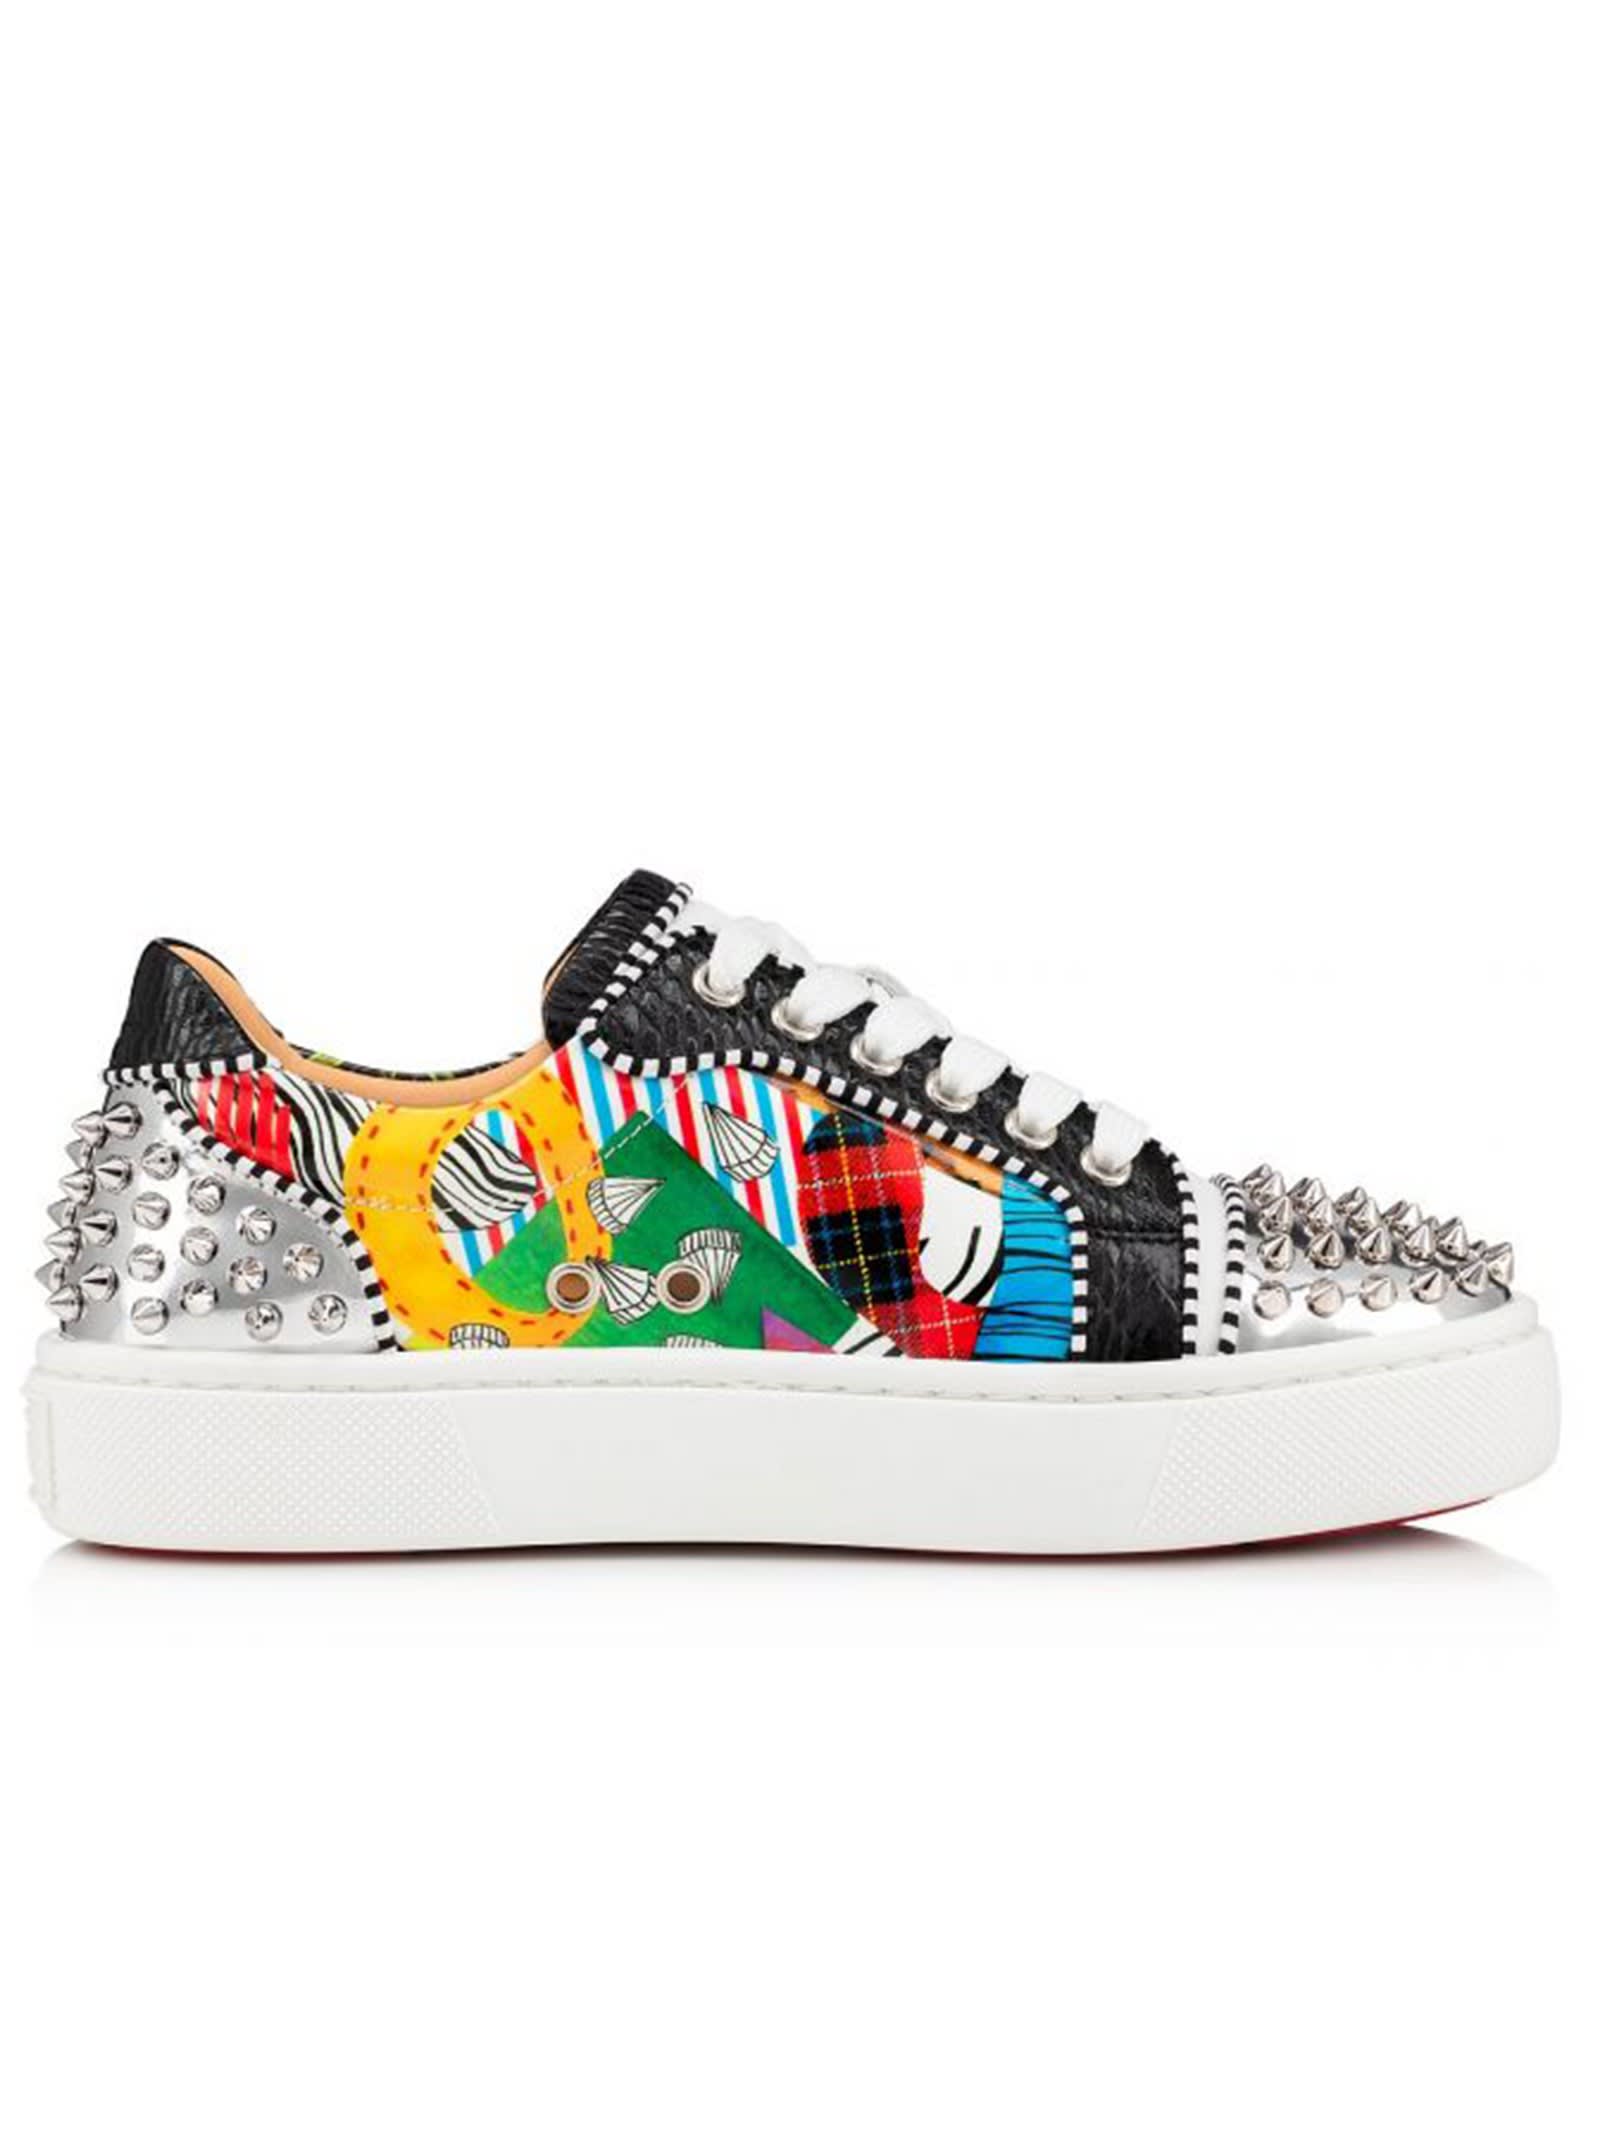 Buy Christian Louboutin Multicolor Vierissima Orlato Sneakers online, shop Christian Louboutin shoes with free shipping